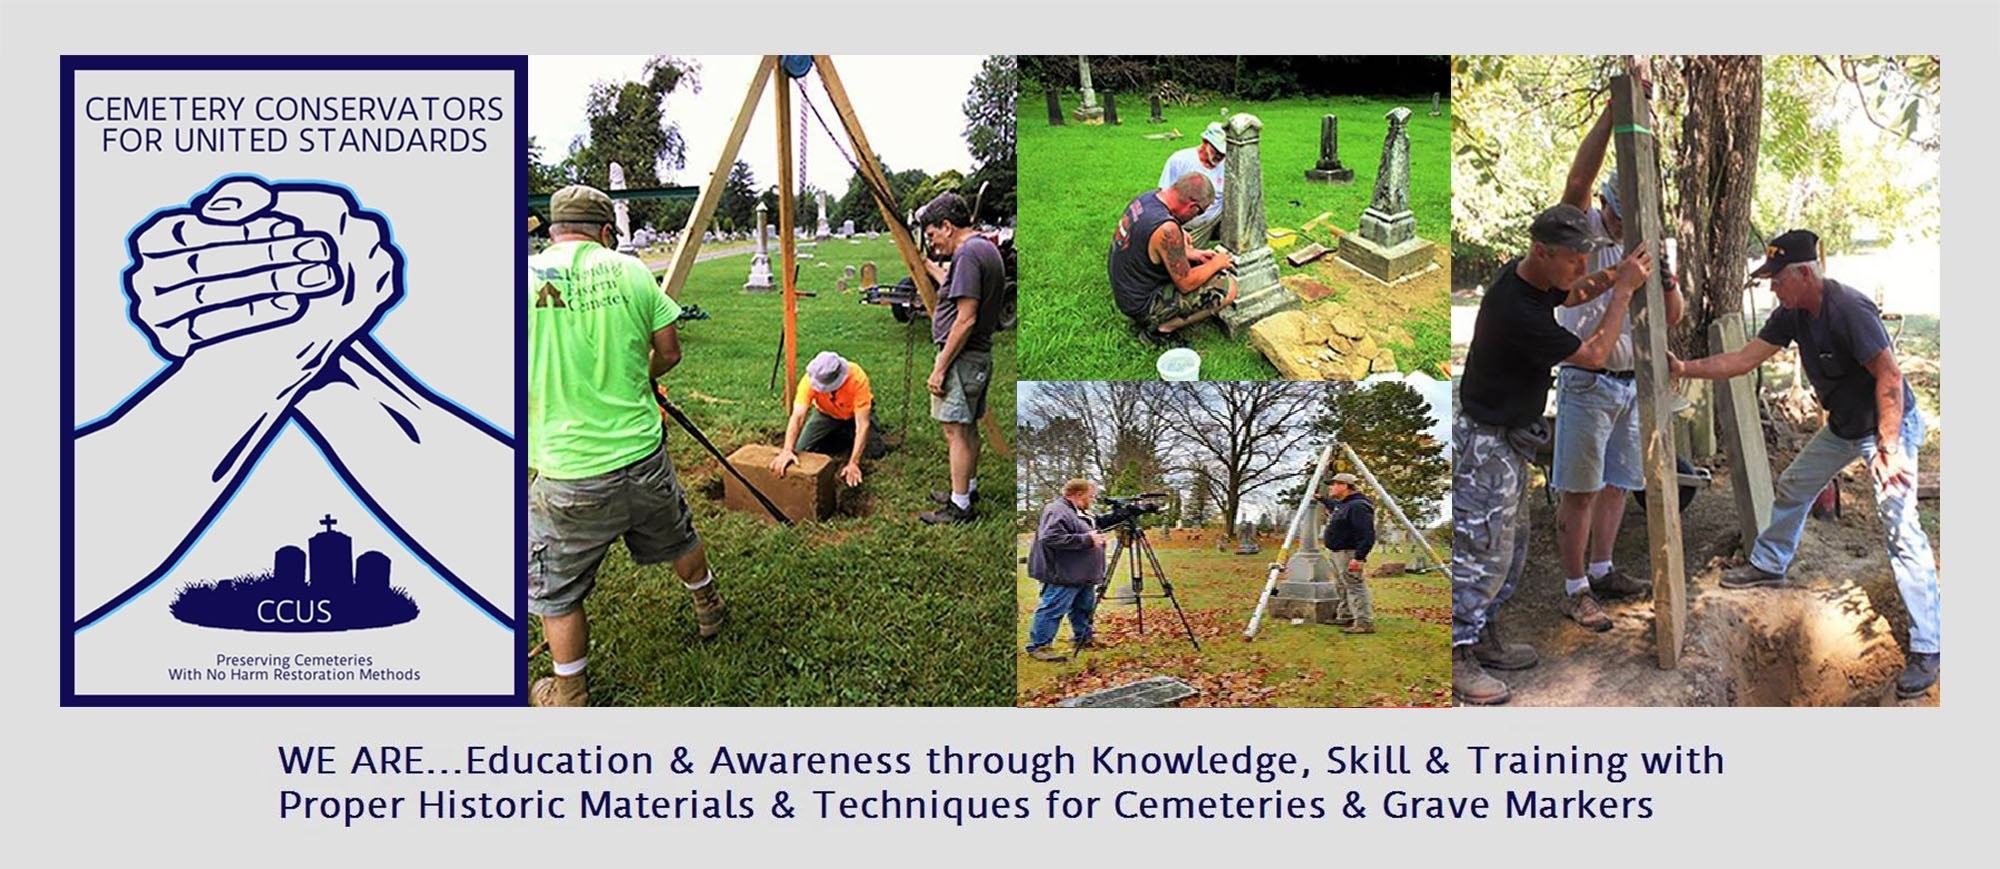 Cemetery Conservators for United Standards